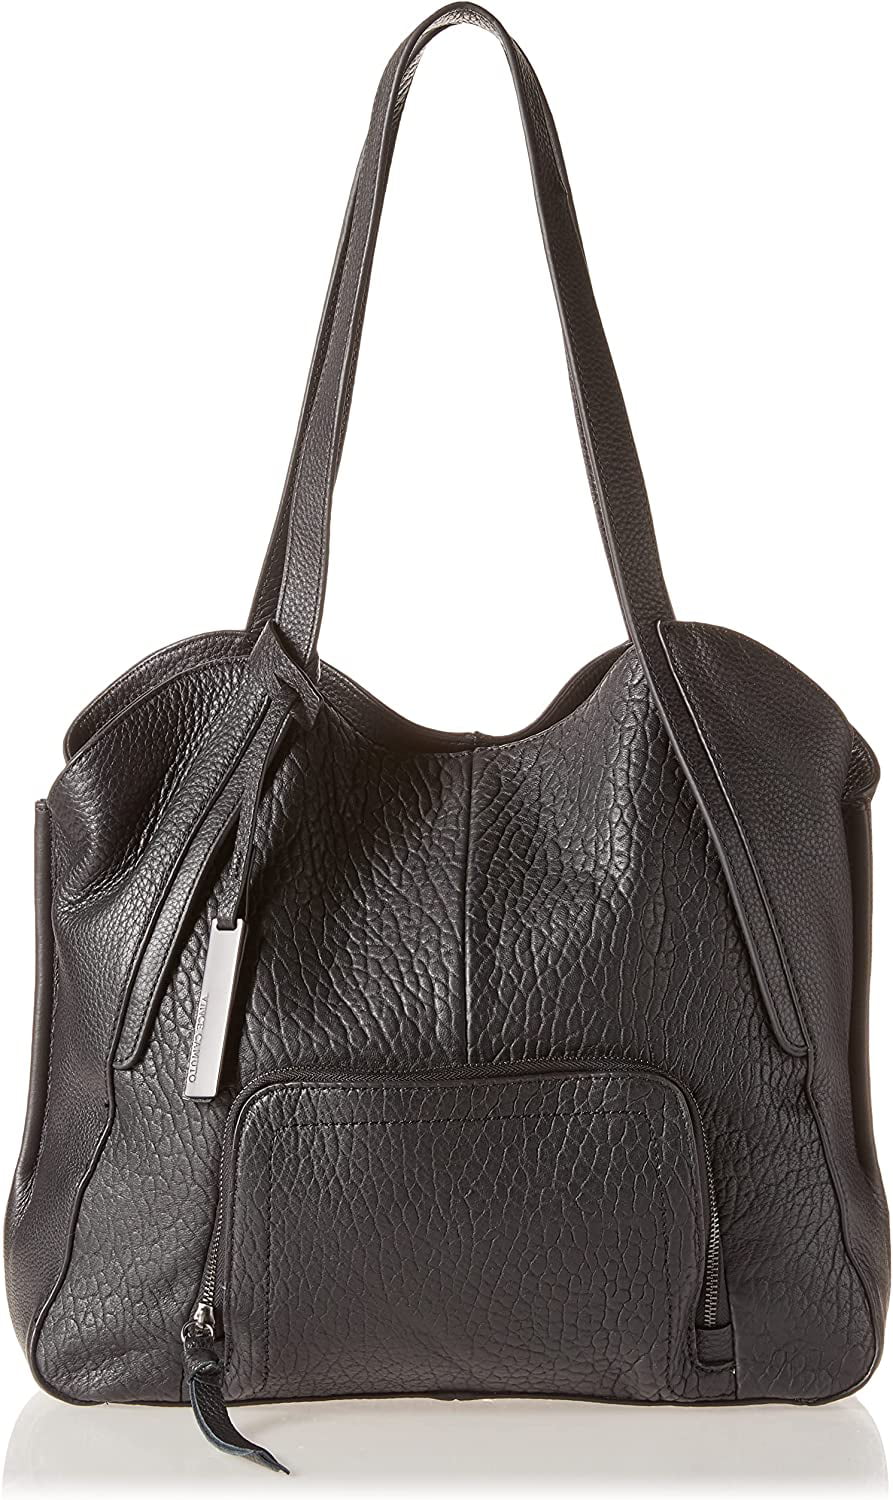 Vince Camuto Kelsy Tote - Universal Grey/Emb Bubble Lb/M